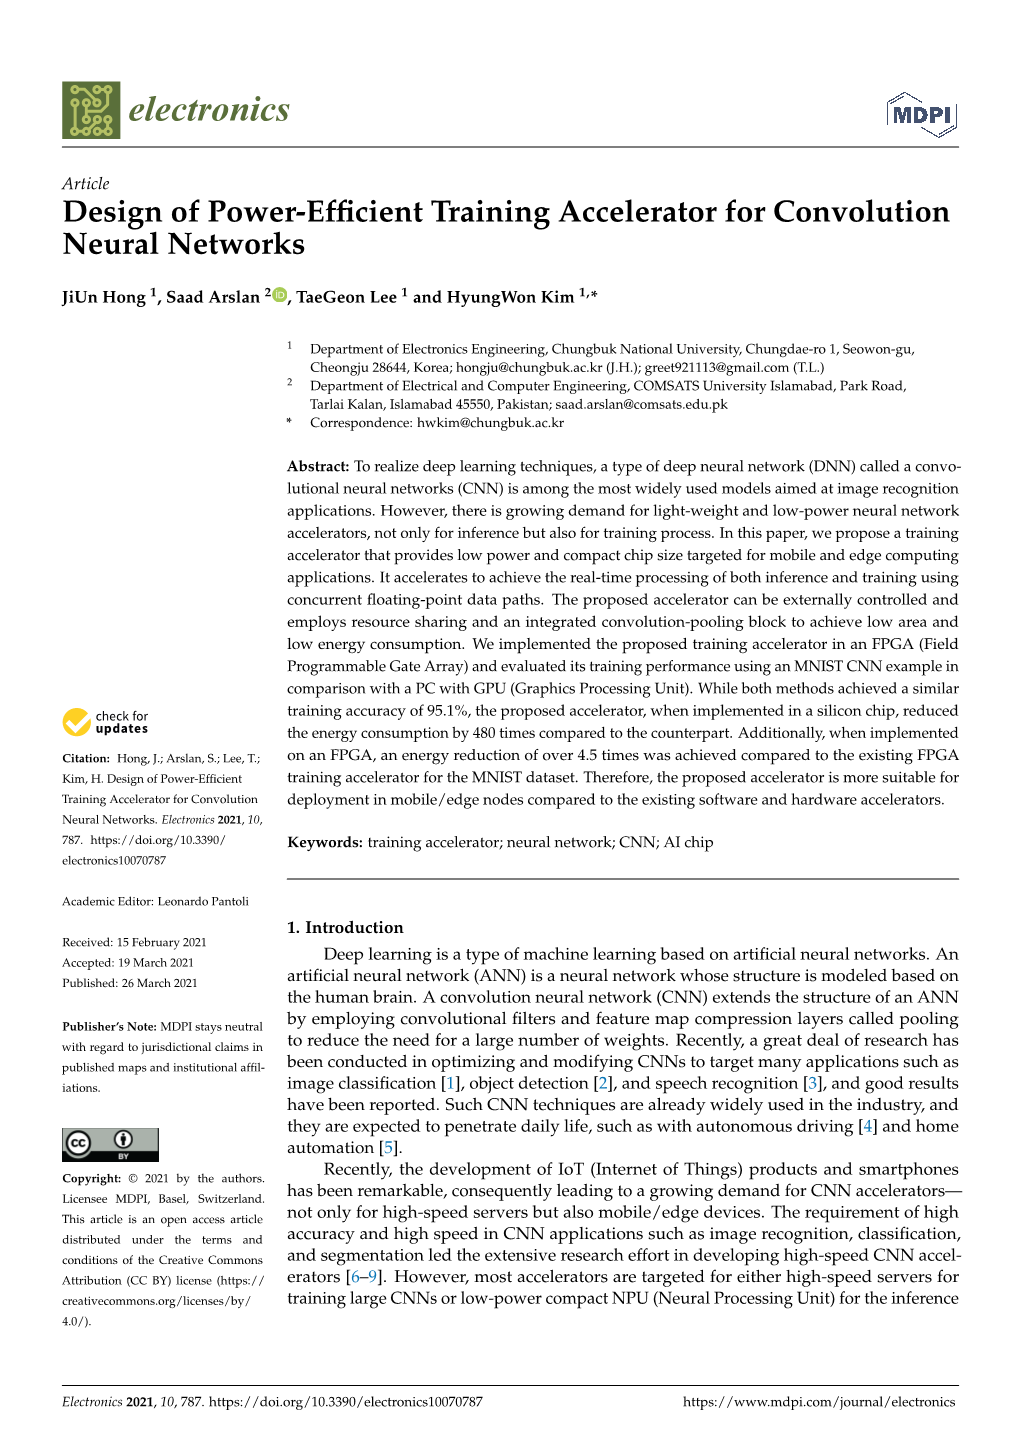 Design of Power-Efficient Training Accelerator for Convolution Neural Networks